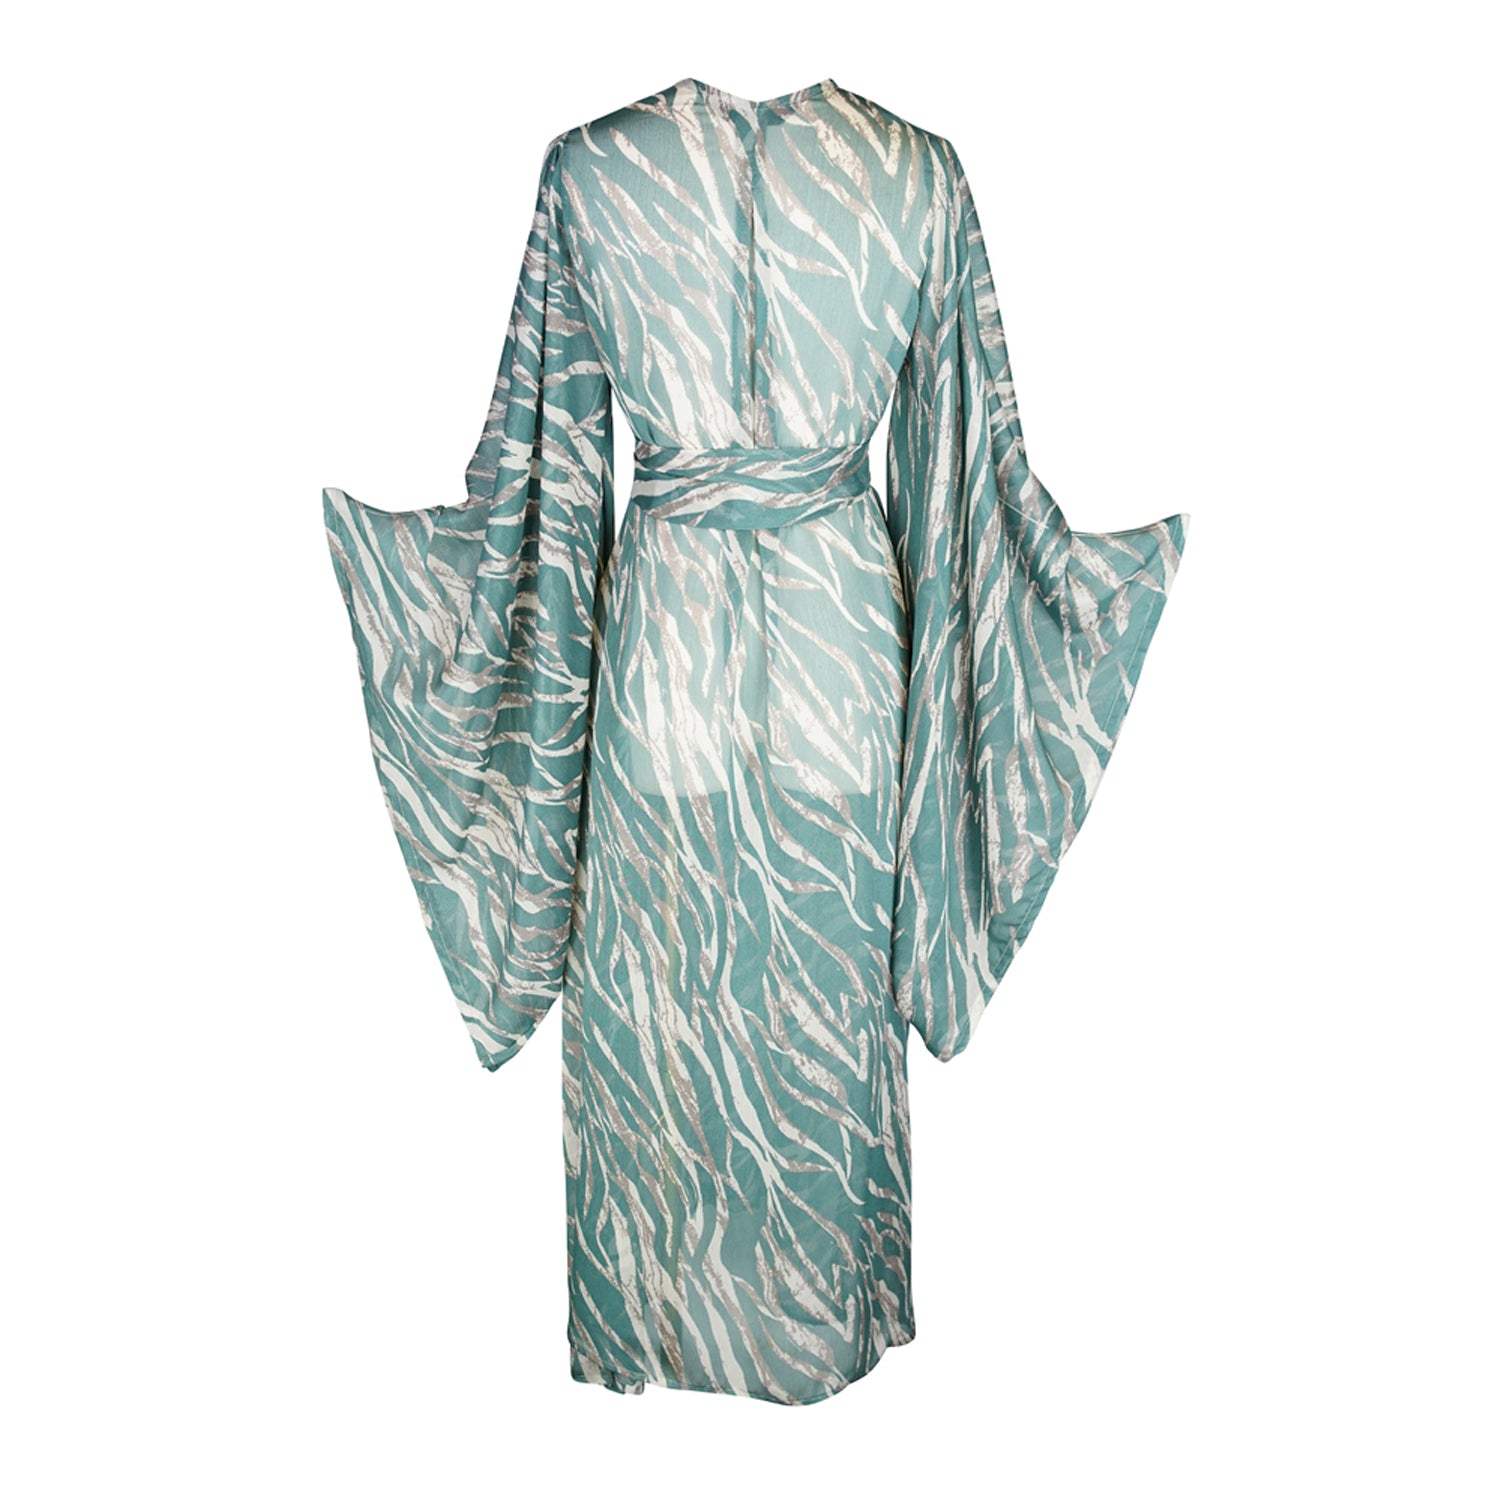 Seafoam zebra print kimono with belt. Can be worn open as a robe or wrap dress. Long flowy sleeves with ankle hem. Made from rayon fabric.